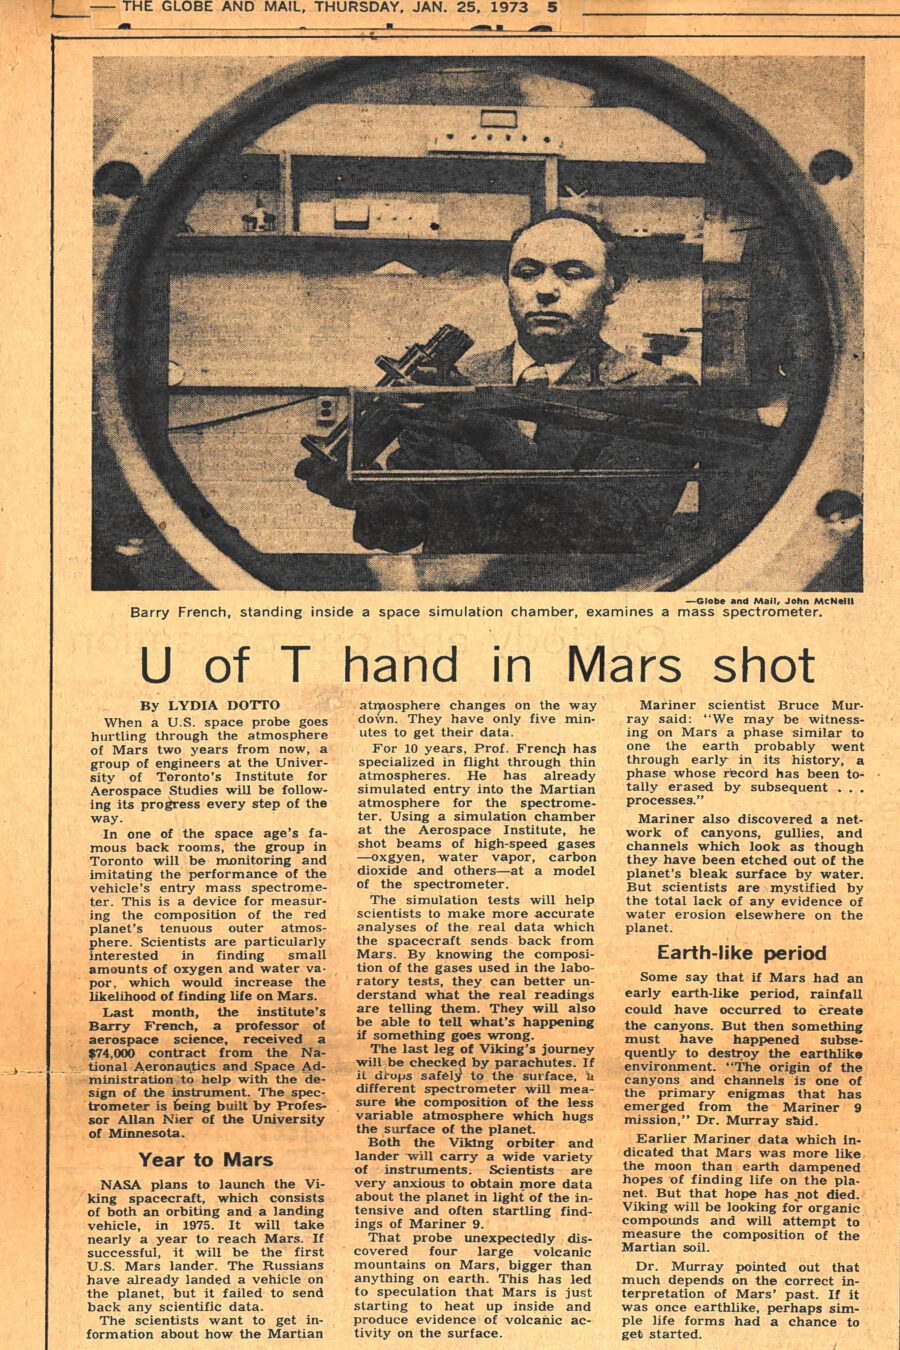 Newspaper clipping from The Globe and Mail, January 25, 1973
Headline: U of T hand in Mars shot
Byline: Lydia Dotto
Photo: Professor Barry French stands in a chamber, framed by a large round window, holding a mass spectrometer device in his hands.
Caption: Barry French, standing inside a space simulation chamber, examines a mass spectrometer.
When a U.S. space probe goes hurtling through the atmosphere of Mars two years from now, a group of engineers at the University of Toronto’s Institute for Aerospace Studies will be following its progress every step of the way. The group in Toronto will be monitoring and imitating the performance of the vehicle’s entry mass spectrometer. This is a device for measuring the composition of the red planet’s tenuous outer atmosphere. Scientists are particularly interested in finding small amounts of oxygen and water vapor, which would increase the likelihood of finding life on Mars.
Last month, the institute’s Barry French, a professor of aerospace science, received a $74,000 contract from the National Aeronautics and Space Administration to help with the design of the instrument. The spectrometer is being built by Professor Allan Nier of the University of Minnesota.
NASA plans to launch the Viking spacecraft, which consists of both an orbiting and a landing vehicle, in 1975. It will take nearly a year to reach Mars. If successful, it will the first U.S. Mars lander. The Russians have already landed a vehicle on the planet, but it failed to send back any scientific data.
The scientists want to get information about how the Martian atmosphere changes on the way down. They have only five minutes to get their data. For ten years, Professor French has specialized in flight through thin atmospheres. He has already simulated entry into the Martian atmosphere for the spectrometer. Using a simulation chamber at the Aerospace Institute, he shot beams of high-speed gases – oxygen, water vapor, carbon dioxide and others – at a model of the spectrometer. The simulation tests will help scientists to make more accurate analysis of the real data which the spacecraft sends back from Mars. By knowing the composition of the gases used in the laboratory tests, they can better understand what the real readings are telling them. They will also be able to tell what’s happening if something goes wrong.
The last leg of the Viking’s journey will be checked by parachutes. If it drops safely to the surface, a different spectrometer will measure the composition of the less variable atmosphere which hugs the surface of the planet.
Both the Viking orbiter and lander will carry a wide variety of instruments. Scientists are very anxious to obtain more data about the planet in light of the intensive and often startling findings of Mariner 9. That probe unexpectedly discovered four large volcanic mountains on Mars, bigger than anything on earth. This has led to speculation that Mars is just starting to heat up inside and produce evidence of volcanic activity on the surface. Mariner also discovered a network of canyons, gullies and channels which look as though they have been etched out of the planet’s bleak surface by water. But scientists are mystified by the total lack of any evidence of water erosion elsewhere on the planet.
Mars may have been earth-like once, with rainfall, and then something happened to destroy that environment. Mariner data has dampened hope of finding life on the planet, indicating that Mars was more like the moon. Viking will be looking for organic compounds and will attempt to measure the composition of the Martian soil. If Mars was once earth-like, perhaps simple life forms had a chance to get started.